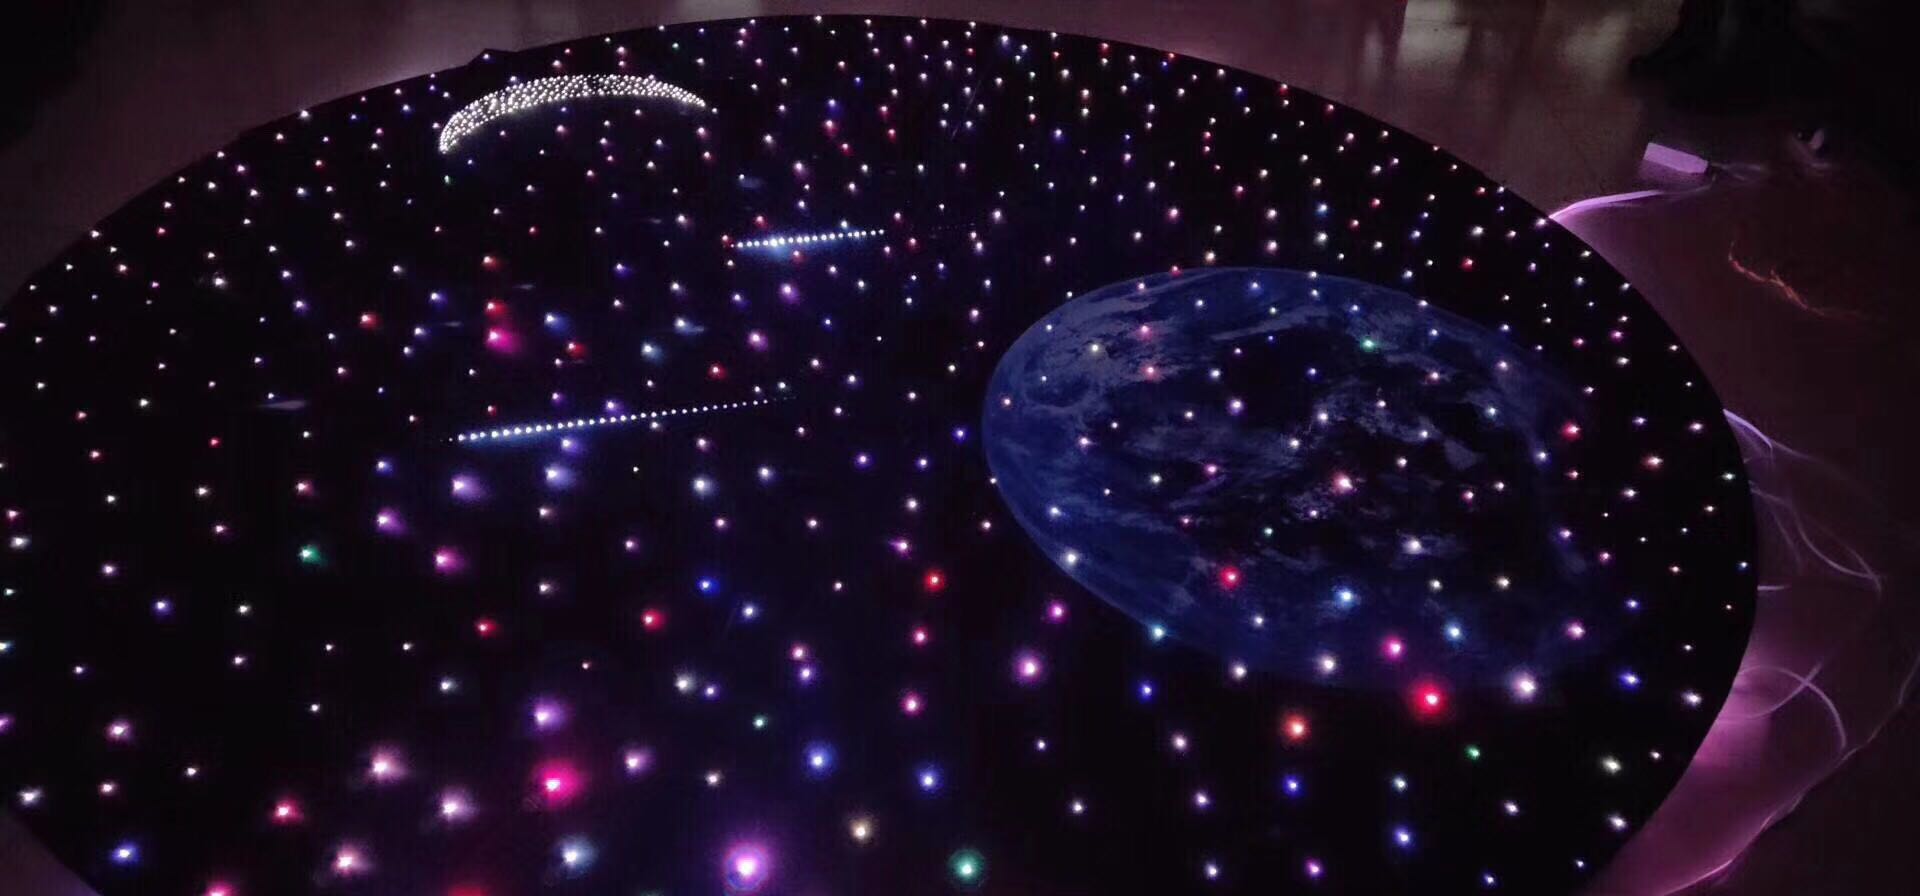 Spray painting of the starry sky top